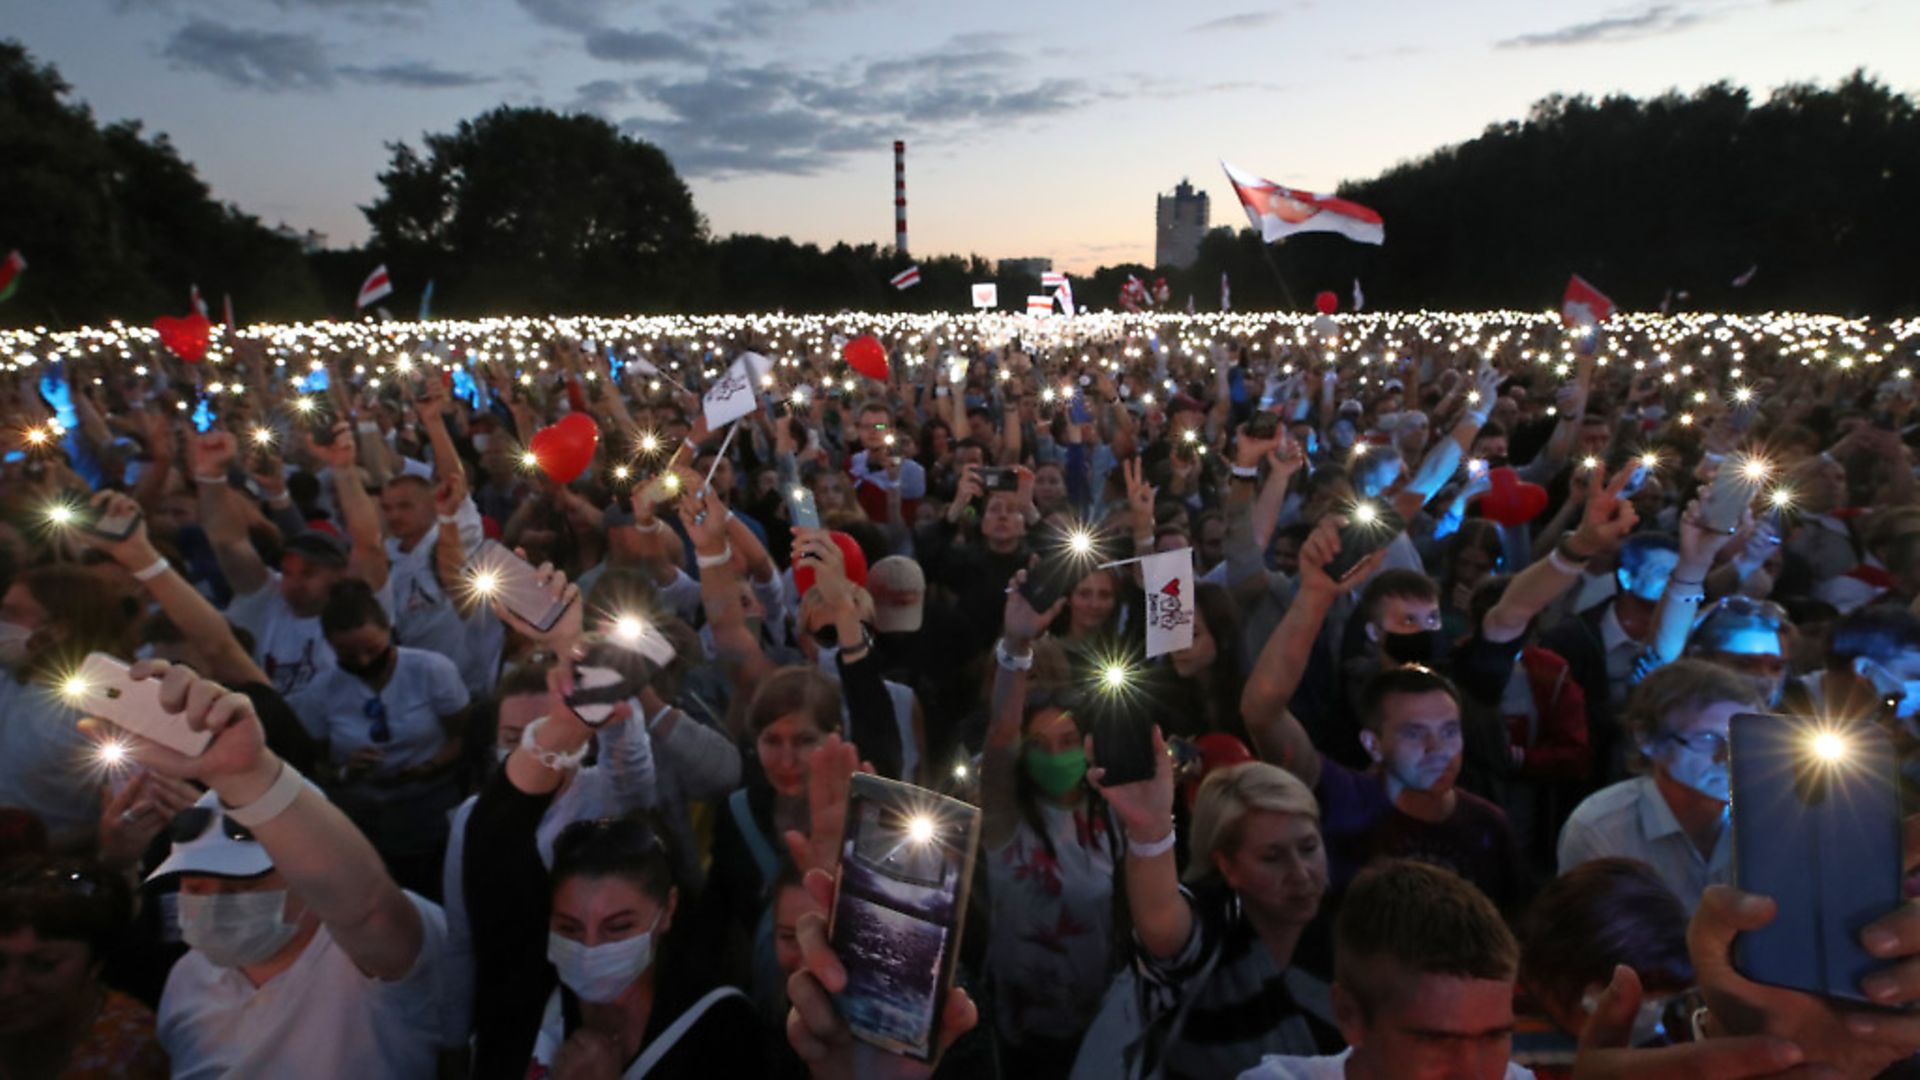 People use their mobile phone torches during a rally supporting Svetlana Tikhanovskaya, candidate for the presidential elections in Belarus (question seven) Nataliya Fedosenko/TASS (Photo by Nataliya FedosenkoTASS via Getty Images) - Credit: Nataliya Fedosenko/TASS